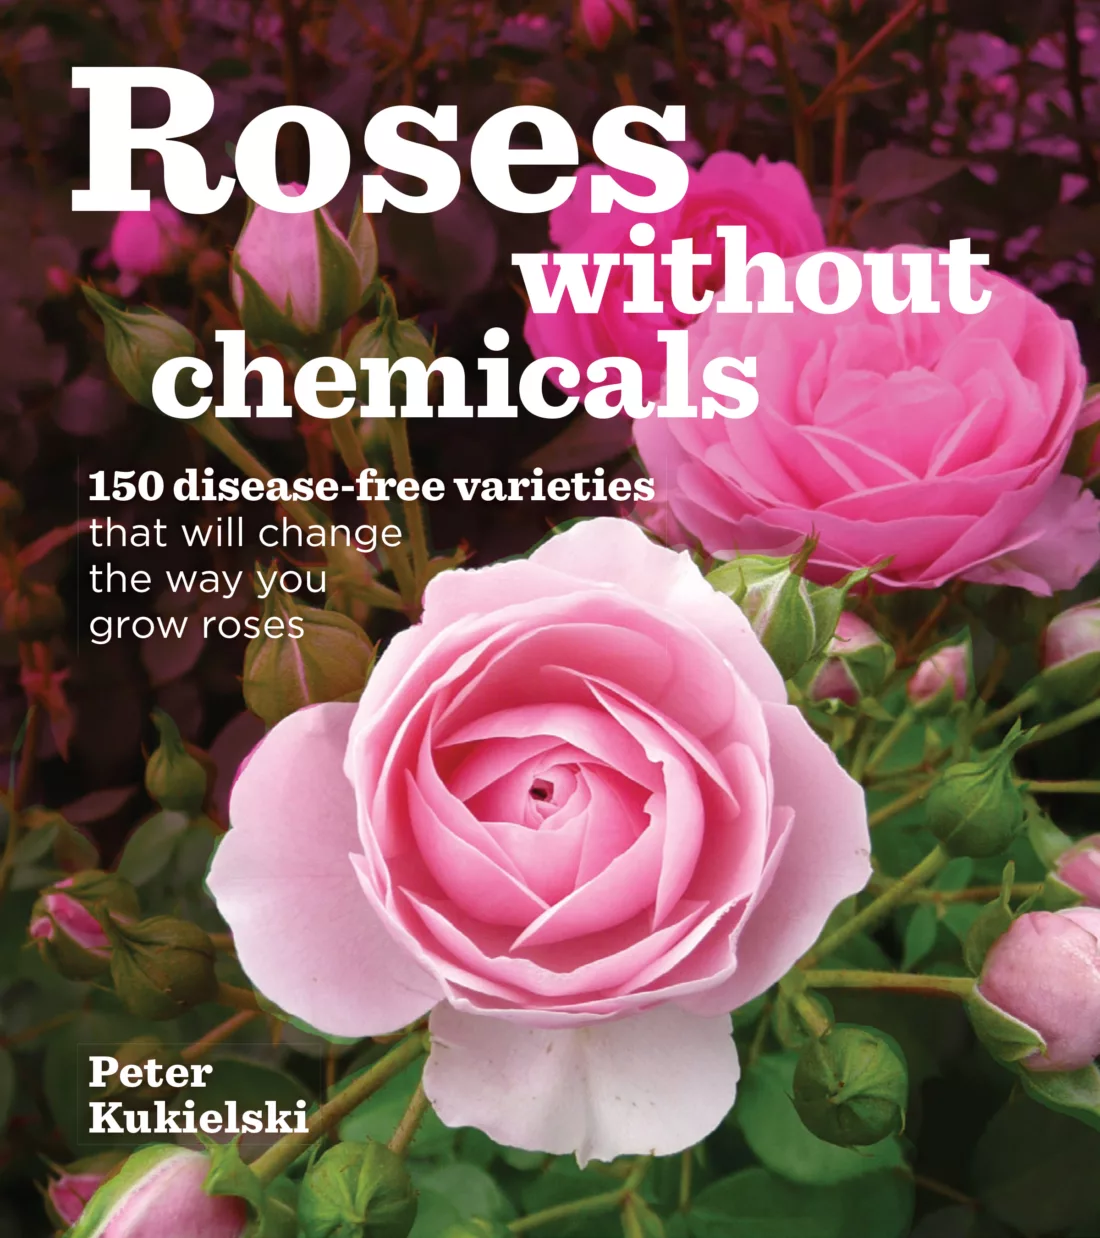 Peter Kukielski's book about roses - roses without chemicals